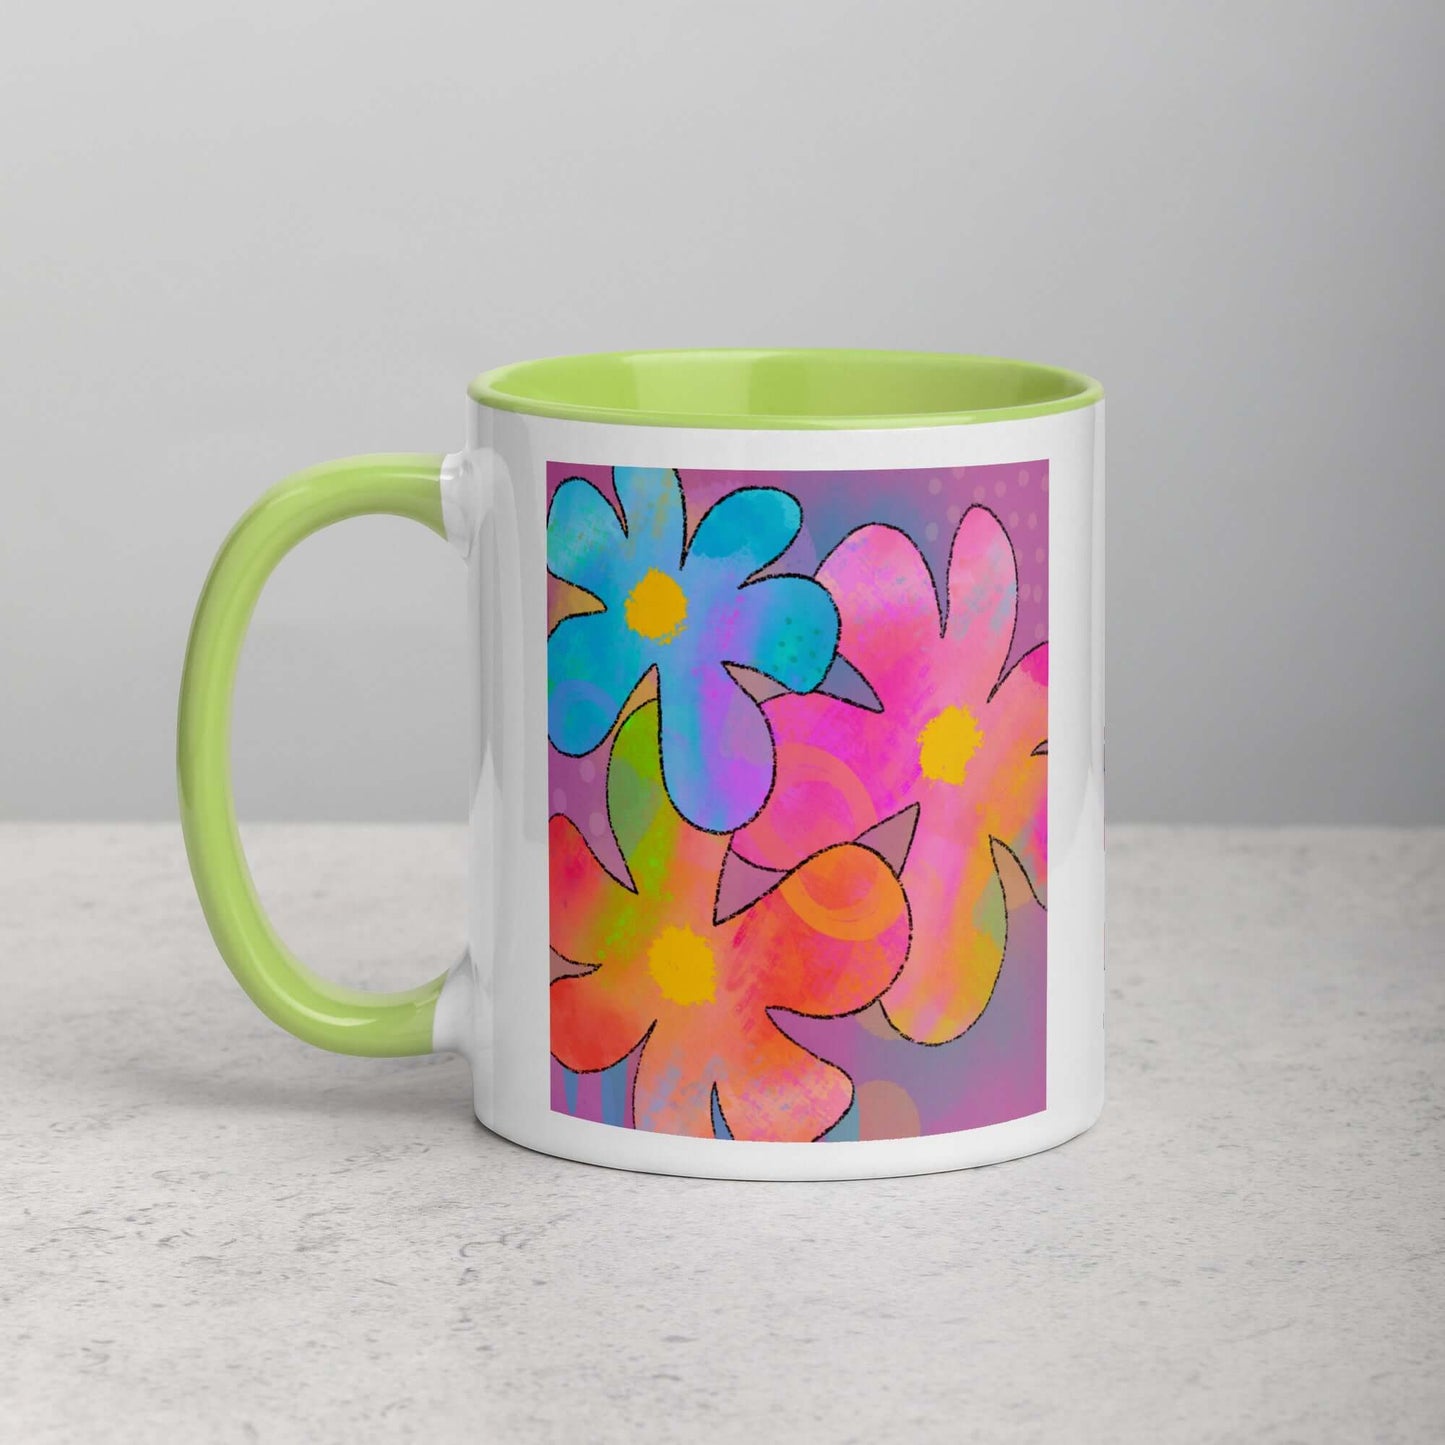 Big Colorful 1960s Psychedelic “Hippie Flowers” Mug with Lime Green Color Inside Left Handed Front View